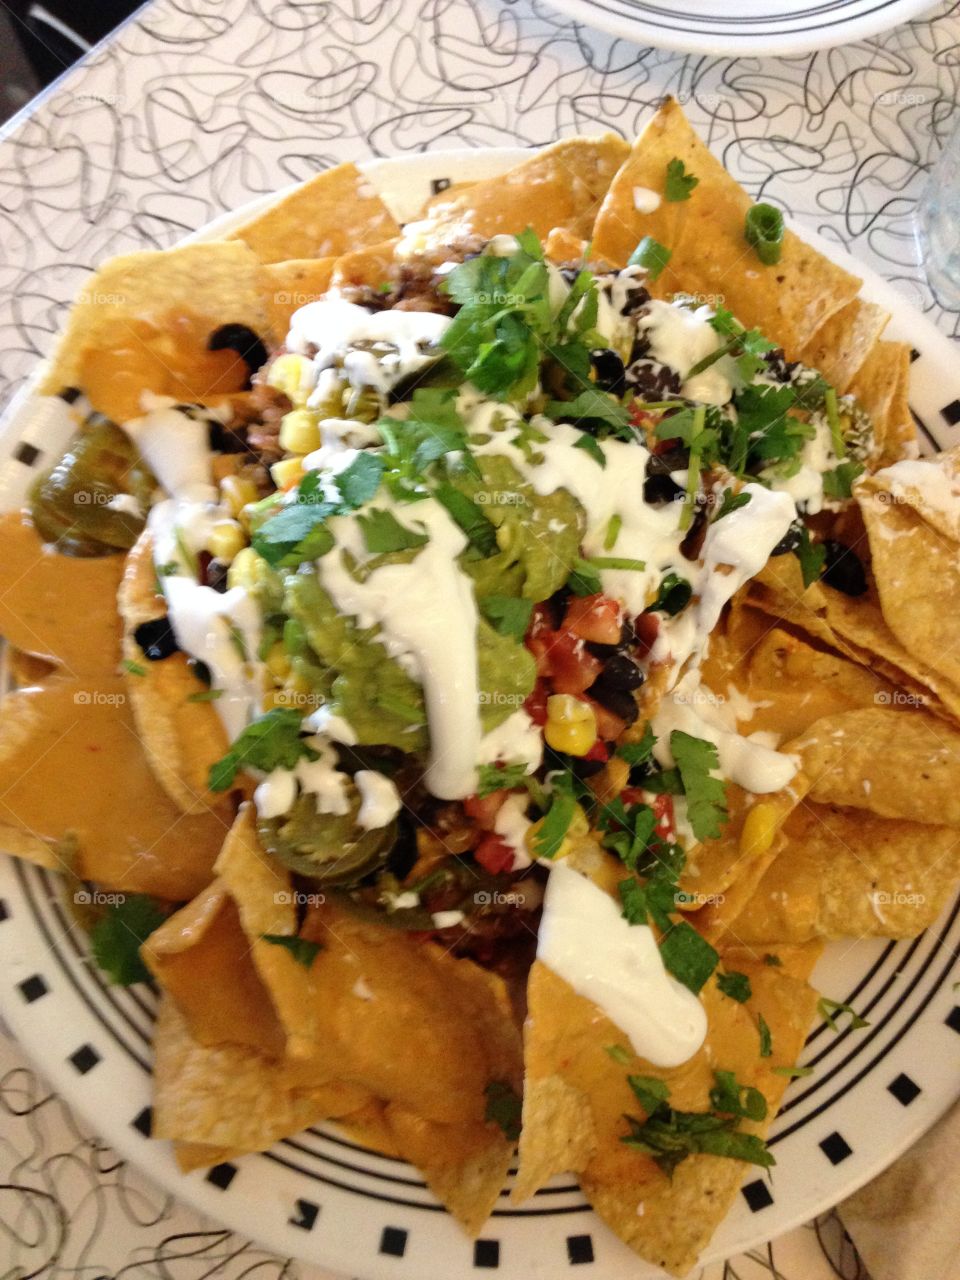 Nacho Supreme - made with our original recipe cashew-based nacho cheese and topped with quinoa, black beans, black olives, cilantro, corn, tomatoes, green onions, sour cream, guacamole & pickled jalapenos. At the Spiral diner in Dallas all vegan